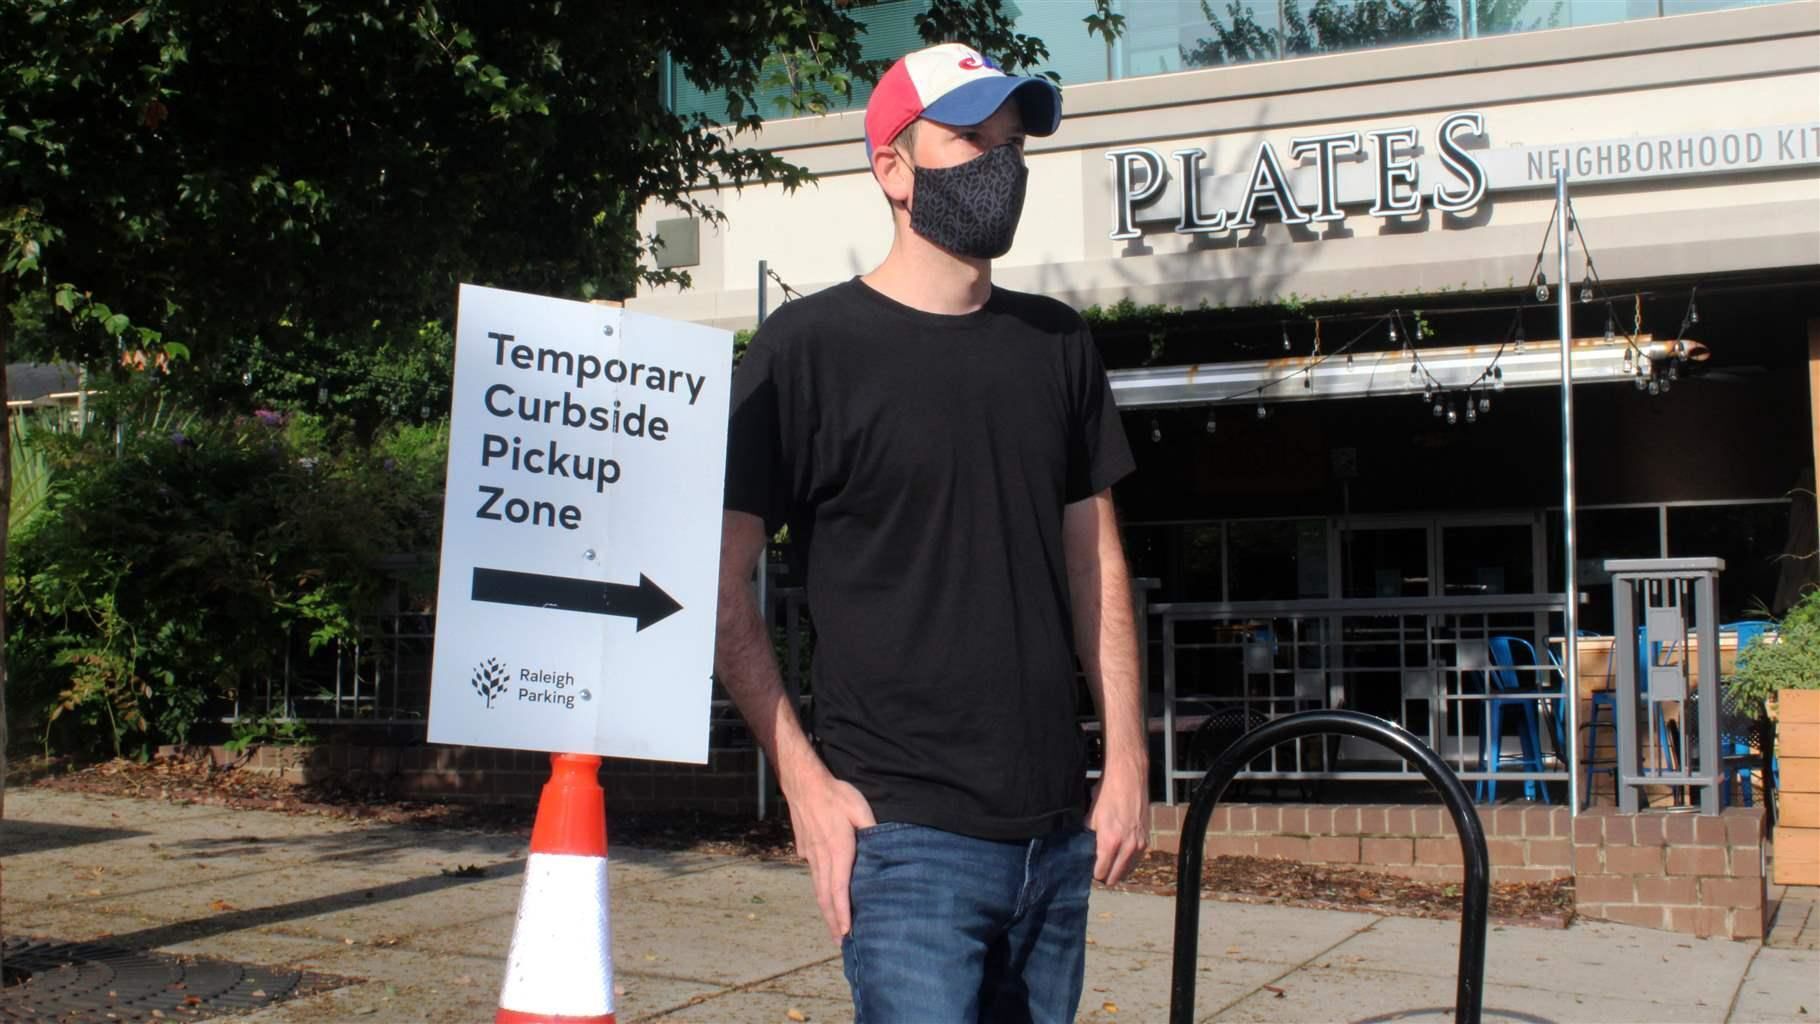 Justin Gallus stands near a curbside pickup zone outside his Plates Neighborhood Kitchen restaurant in downtown Raleigh, N.C., this week. Cities and counties are creating these spaces to help keep restaurants in business during the COVID-19 outbreak. PHOTO CREDIT: Tribune News Service